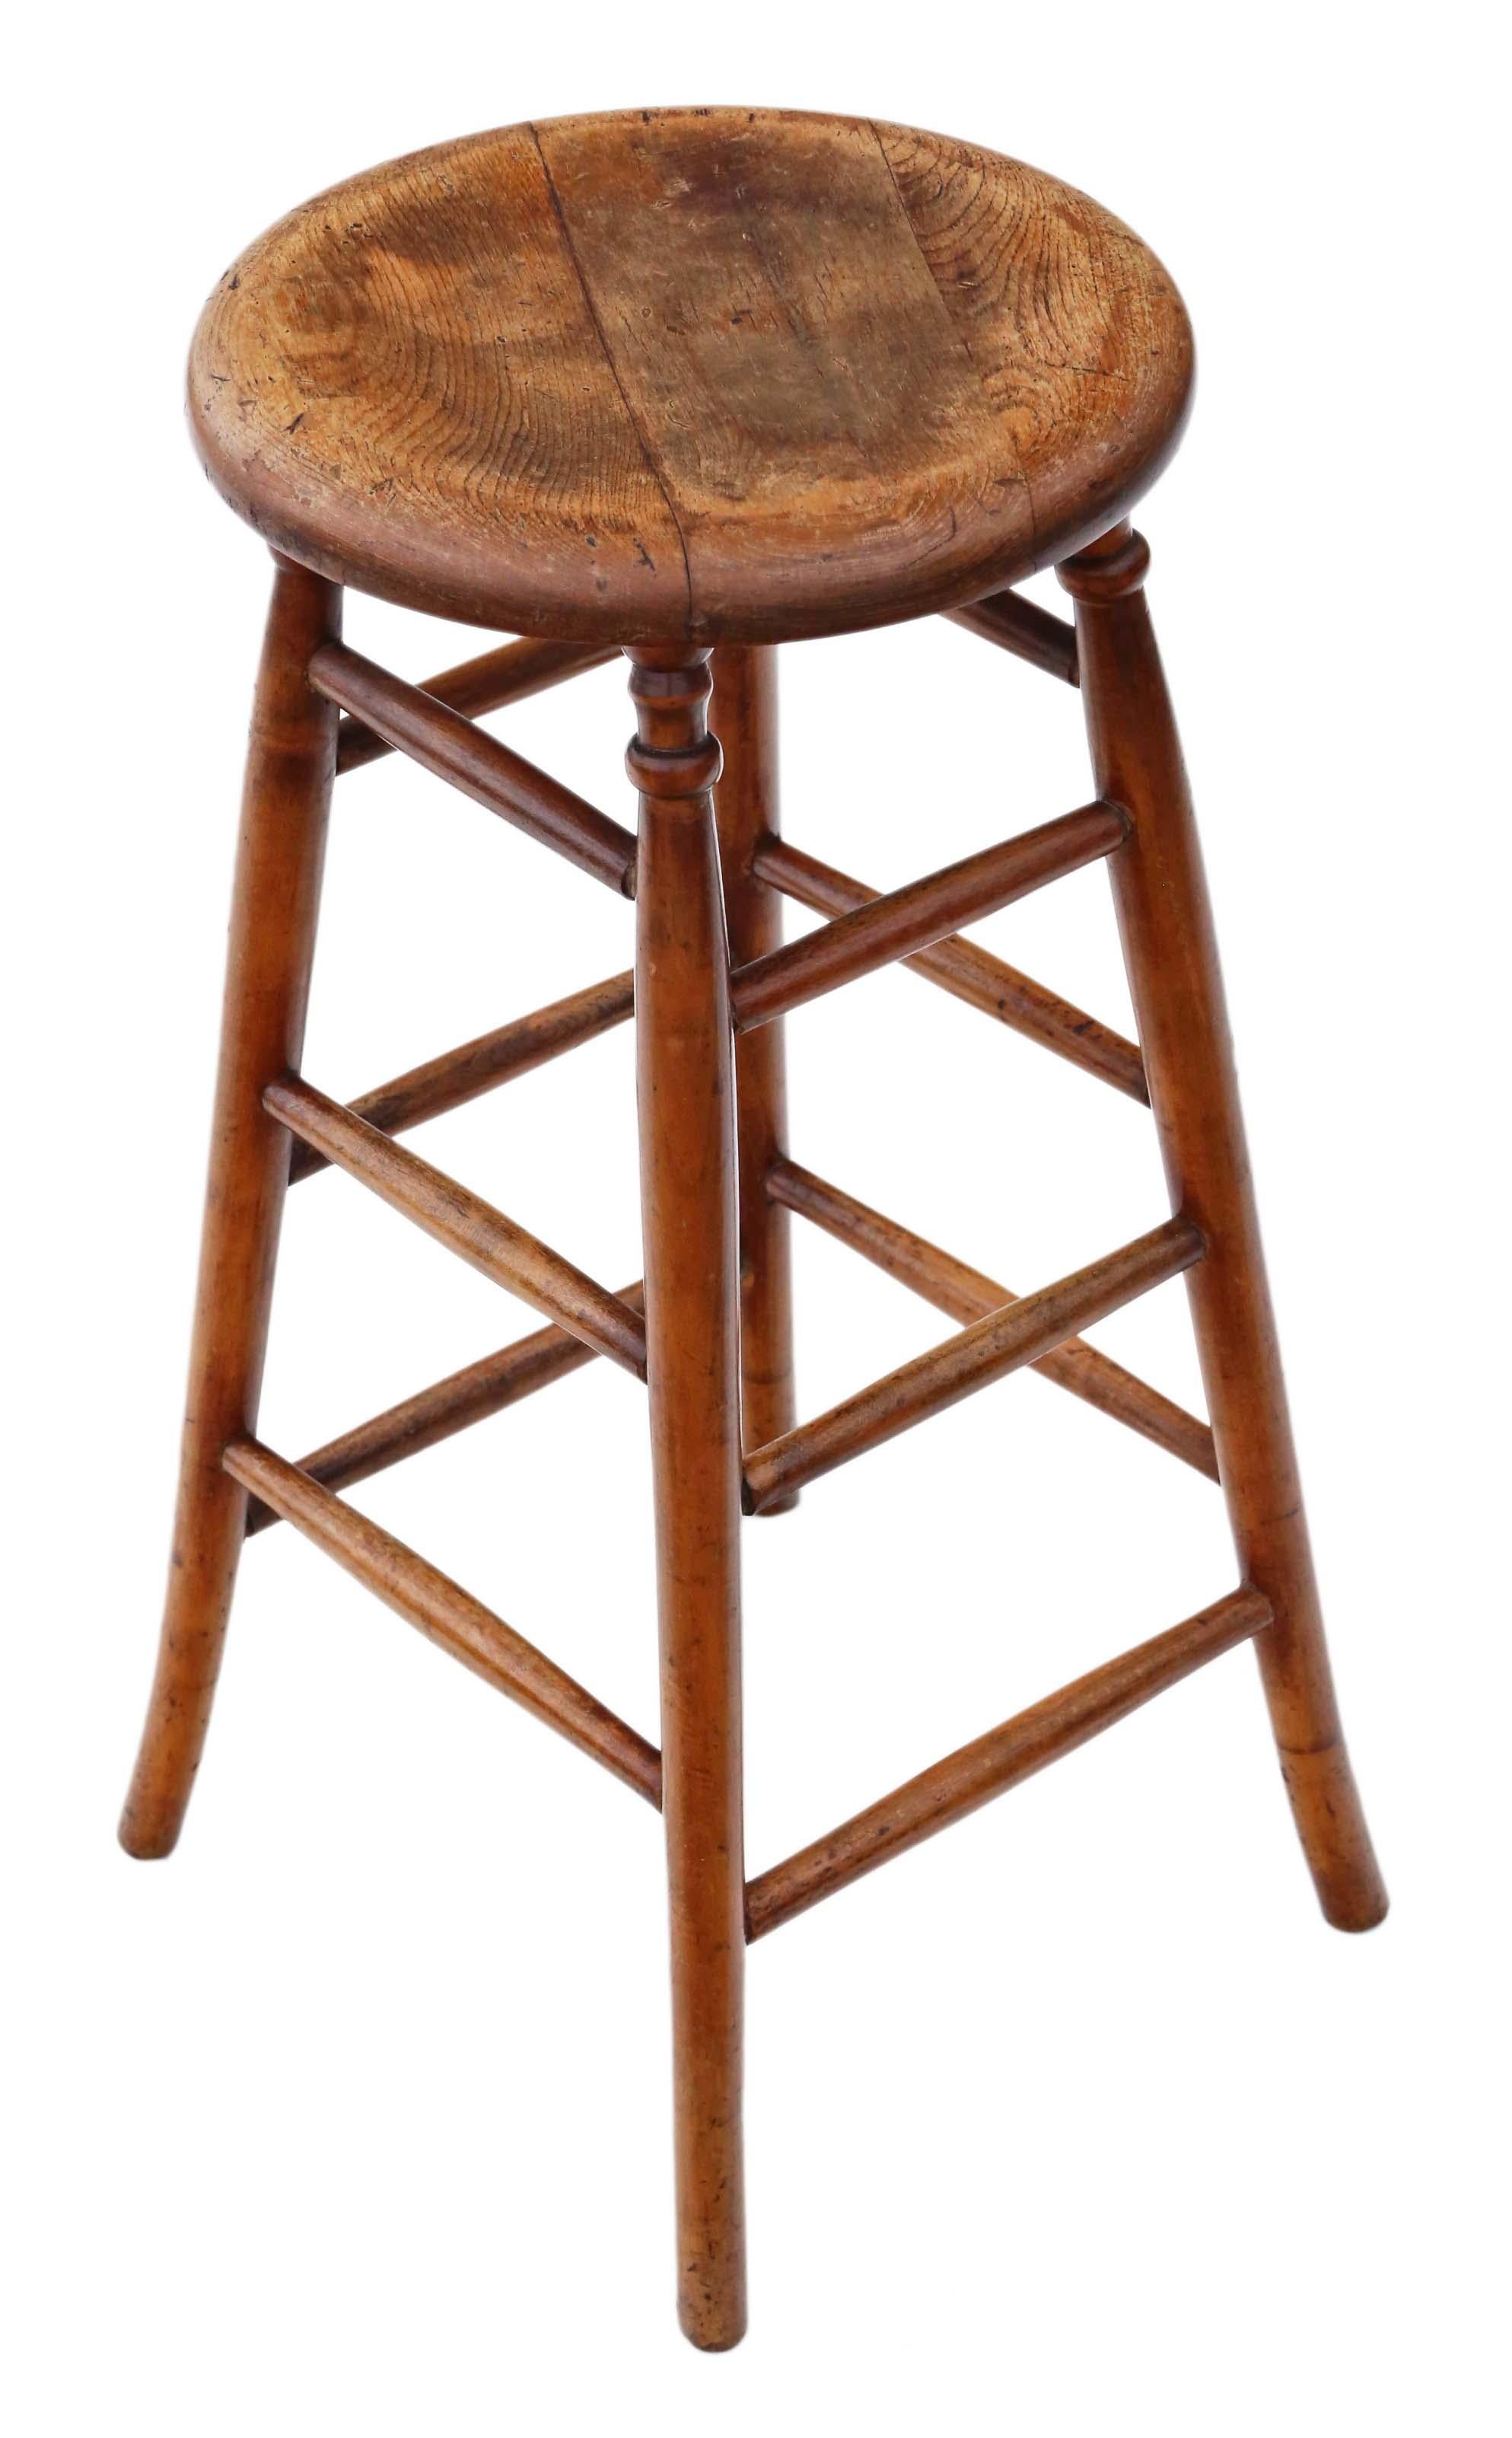 Antique quality Victorian 19th century ash and elm stool.
Quality, decorative and attractive, strong with no loose joints or wobbles. No woodworm.
Would look amazing in the right location. Full of age, character and charm.
Overall maximum